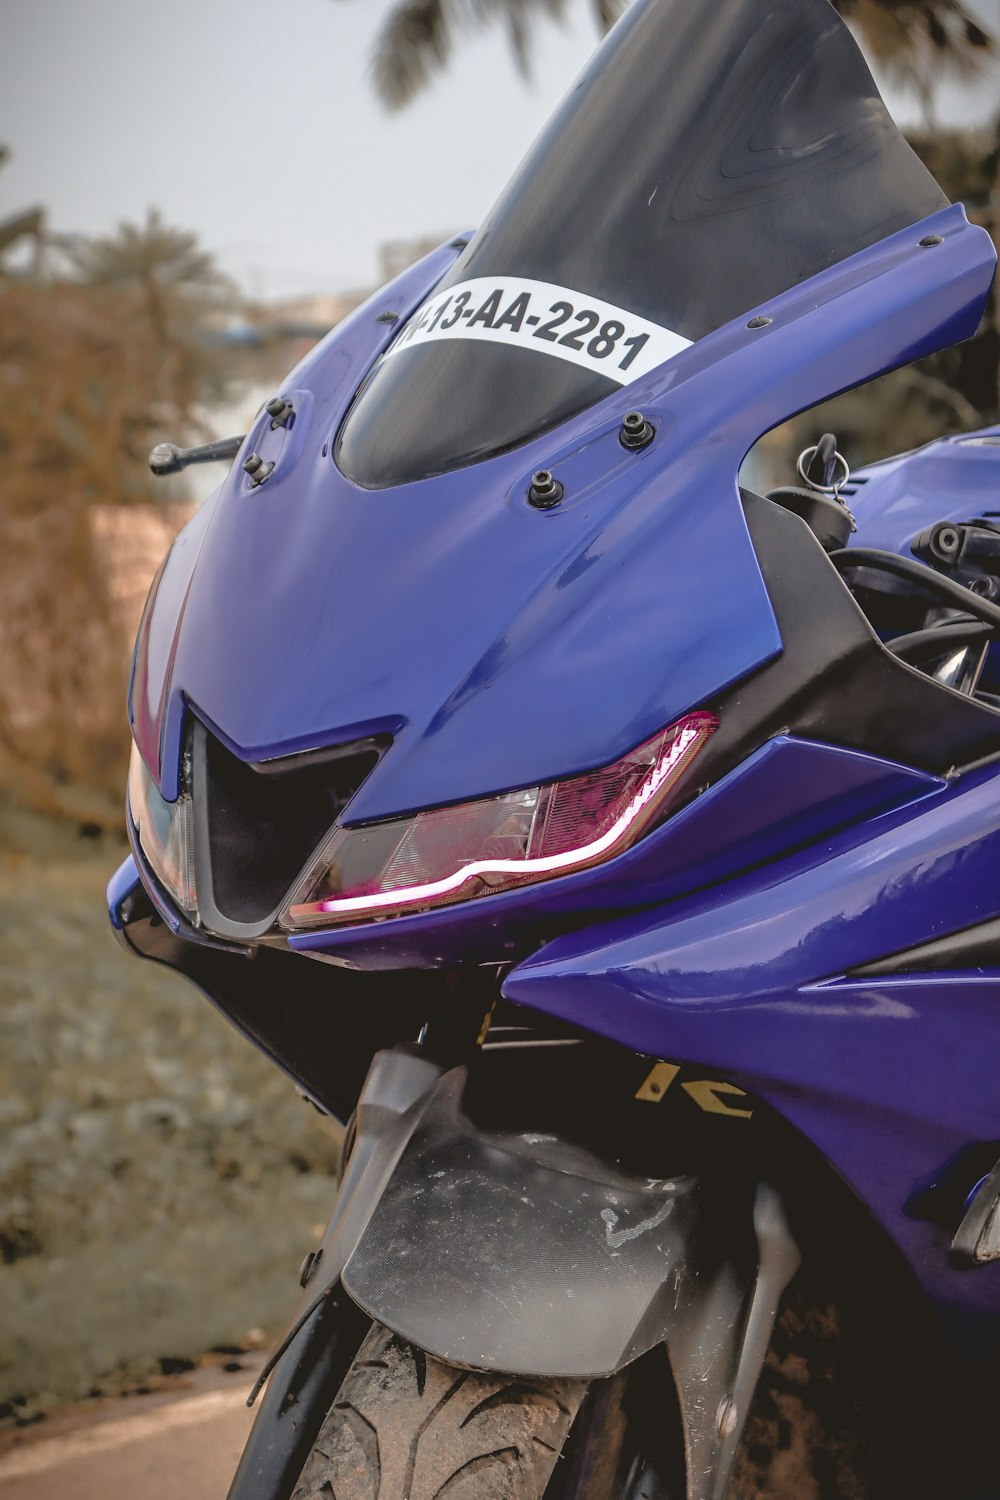 a close up of a motorcycle parked on the side of a road